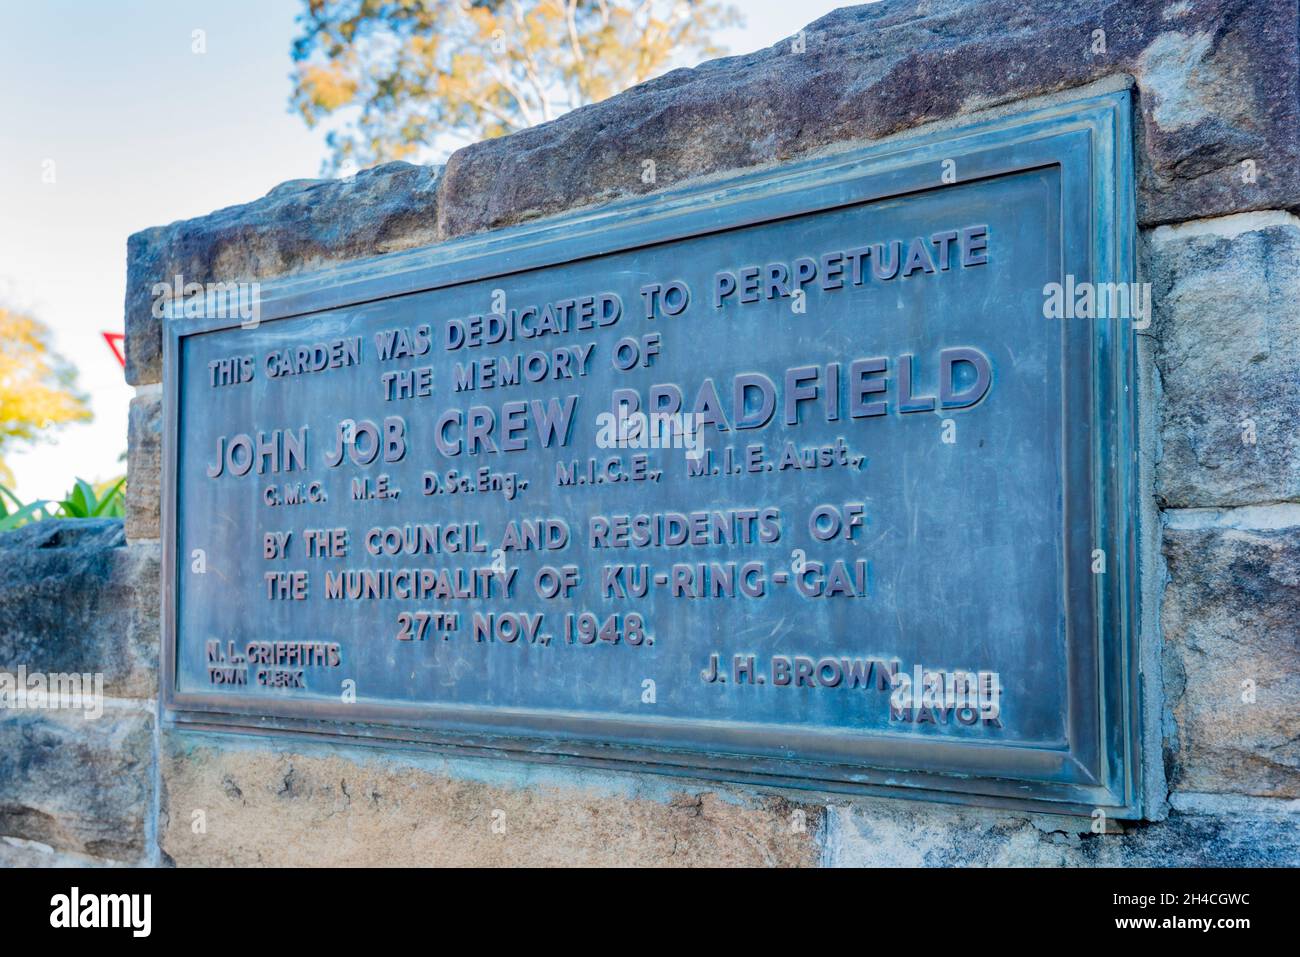 A 1948 erected memorial to Engineer, John Job Crew Bradfield close to where he lived in Gordon, New South Wales, Australia Stock Photo